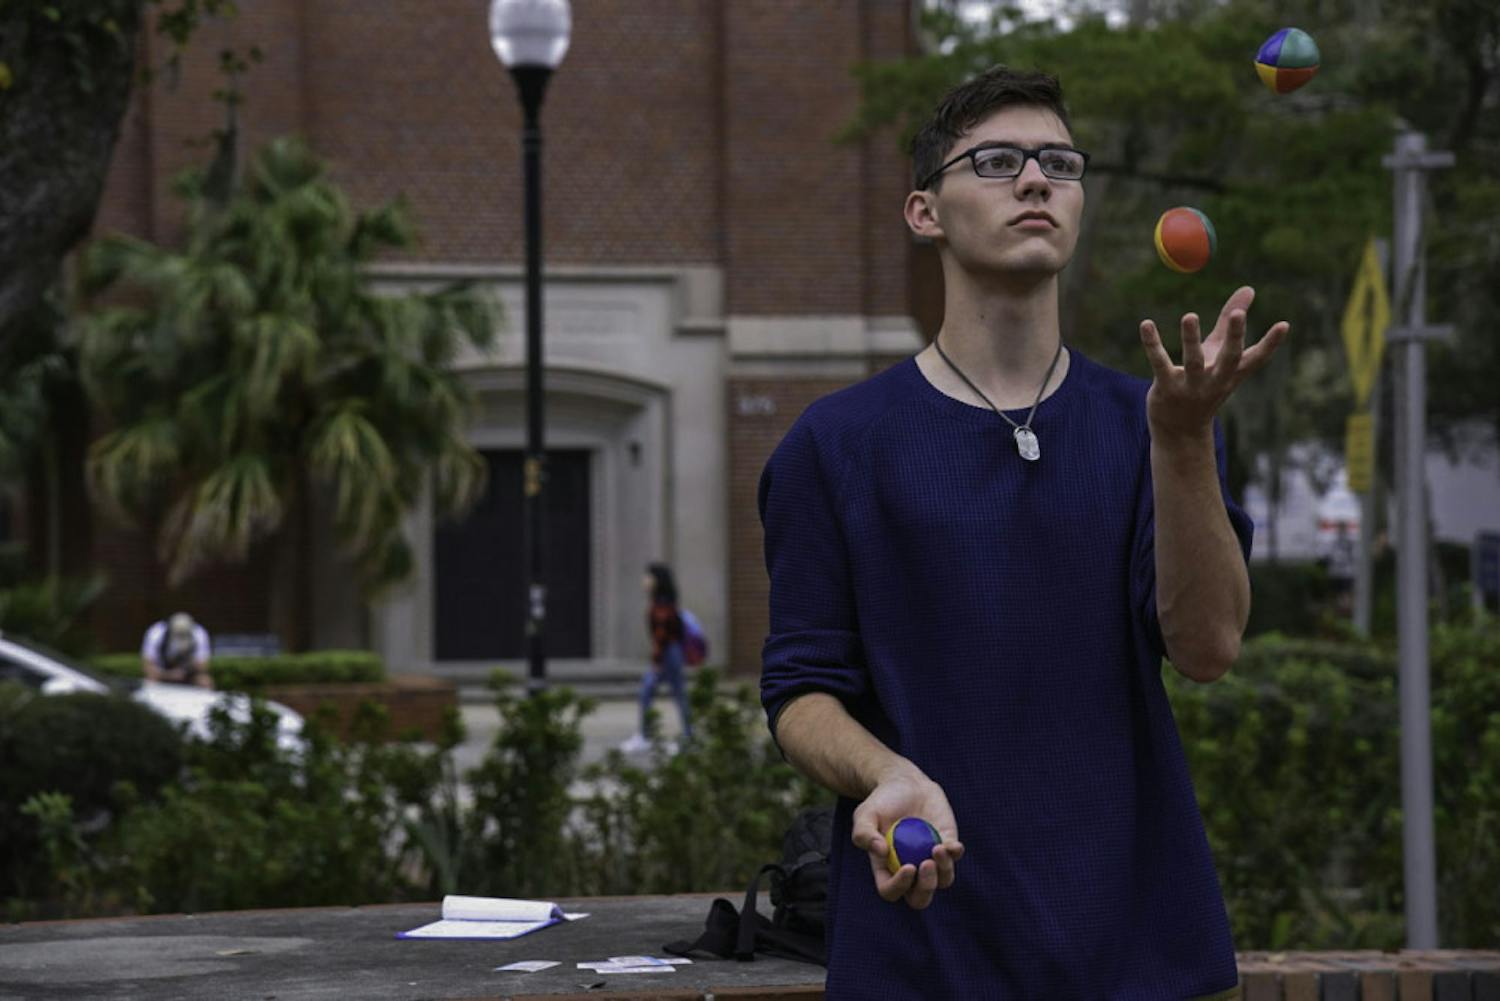 Ethan Irvin, a 19-year-old UF mathematics sophomore, juggles on Turlington Plaza on Feb. 12. Irvin said he's been juggling for more than two years and loves doing it. "It's a good stress reliever,” he said.